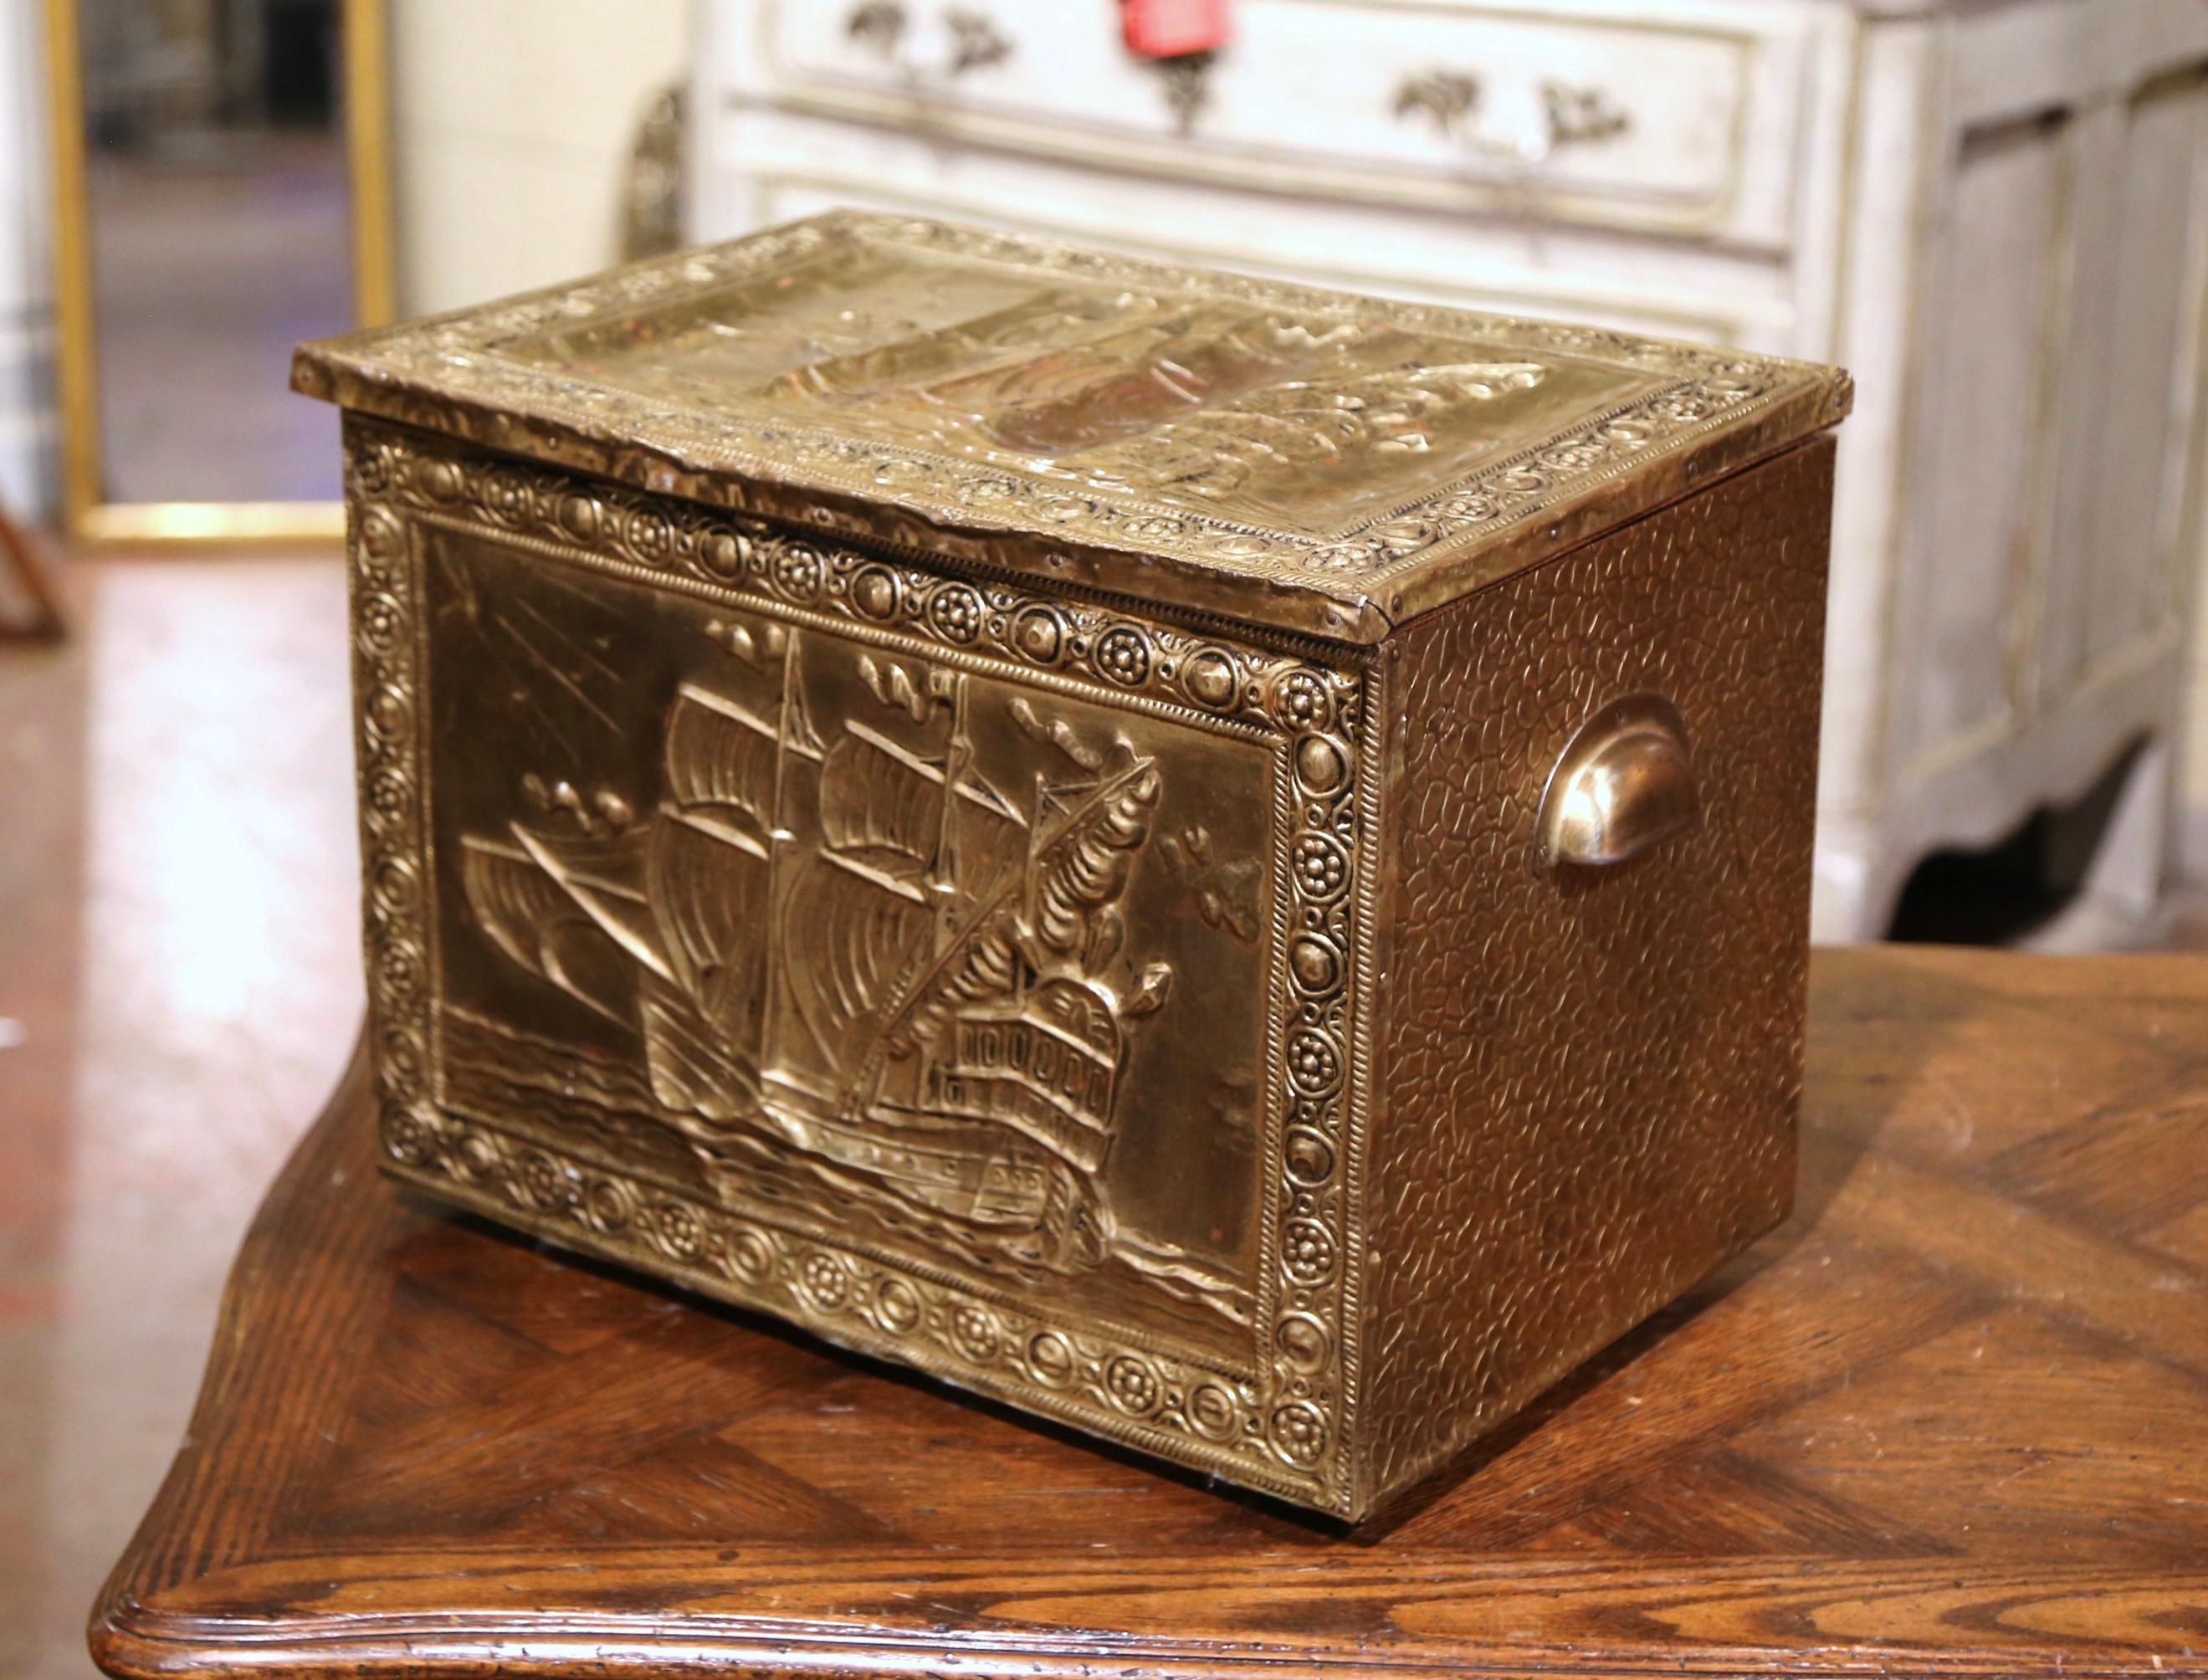 Napoleon III 19th Century French Repousse Brass and Wood Box with Sailboat Decor